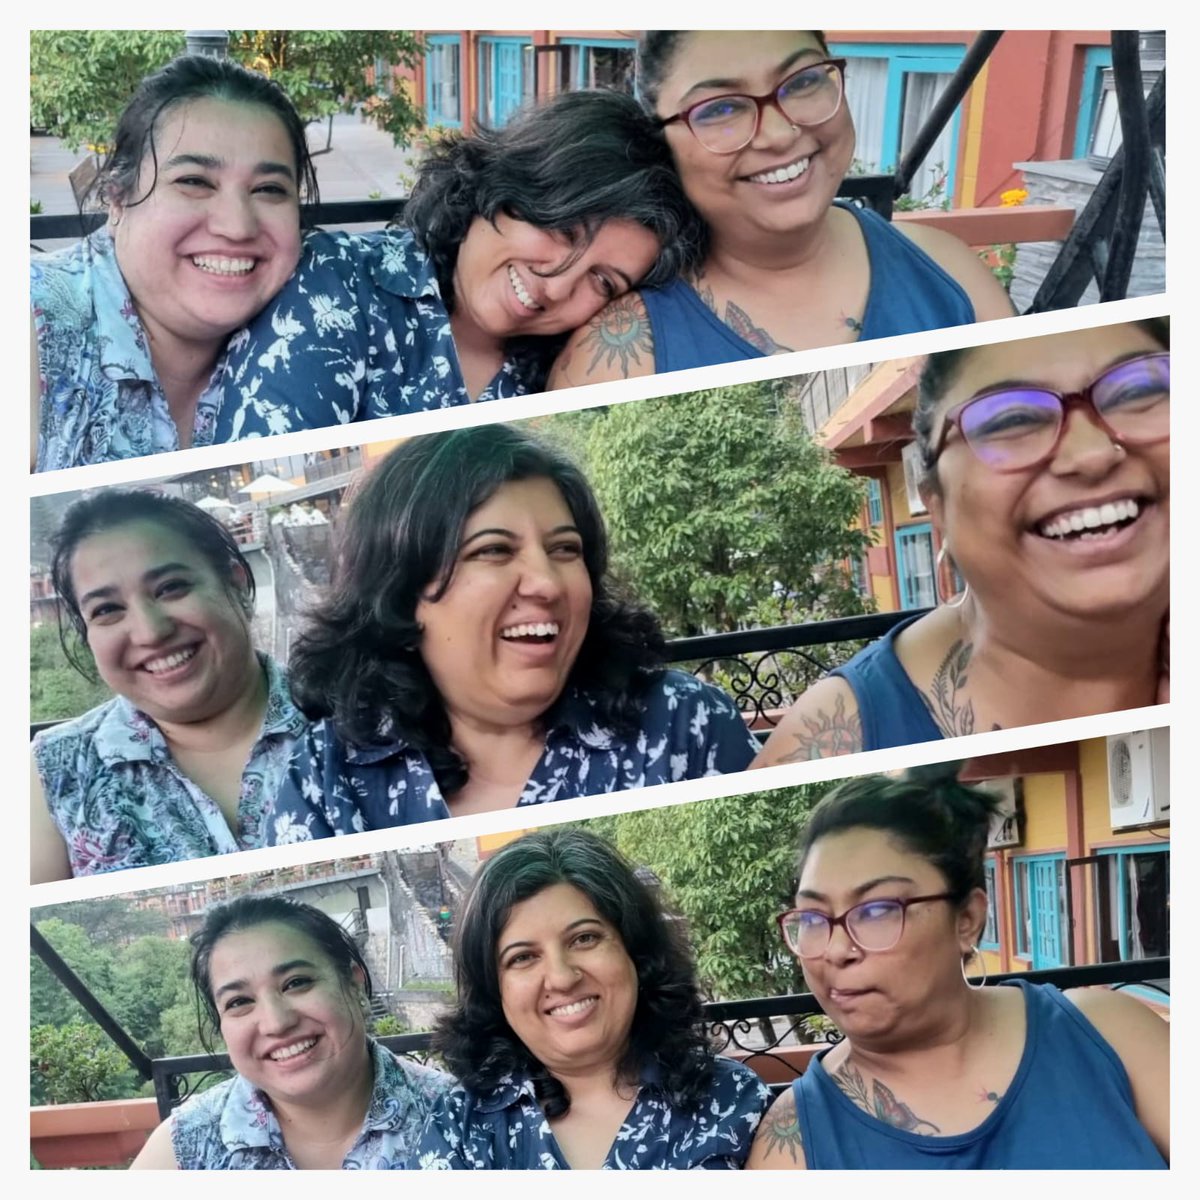 Sharing memories of #FeministJoy and solidarity!
During our June in-person training on How to Succeed at VAW Prevention, this happy moment between our collaborators @binitashres, Jaya Luintel & Poonam Rishal was captured in Nepal.
Thanks to Abit Manandhar for the photo.